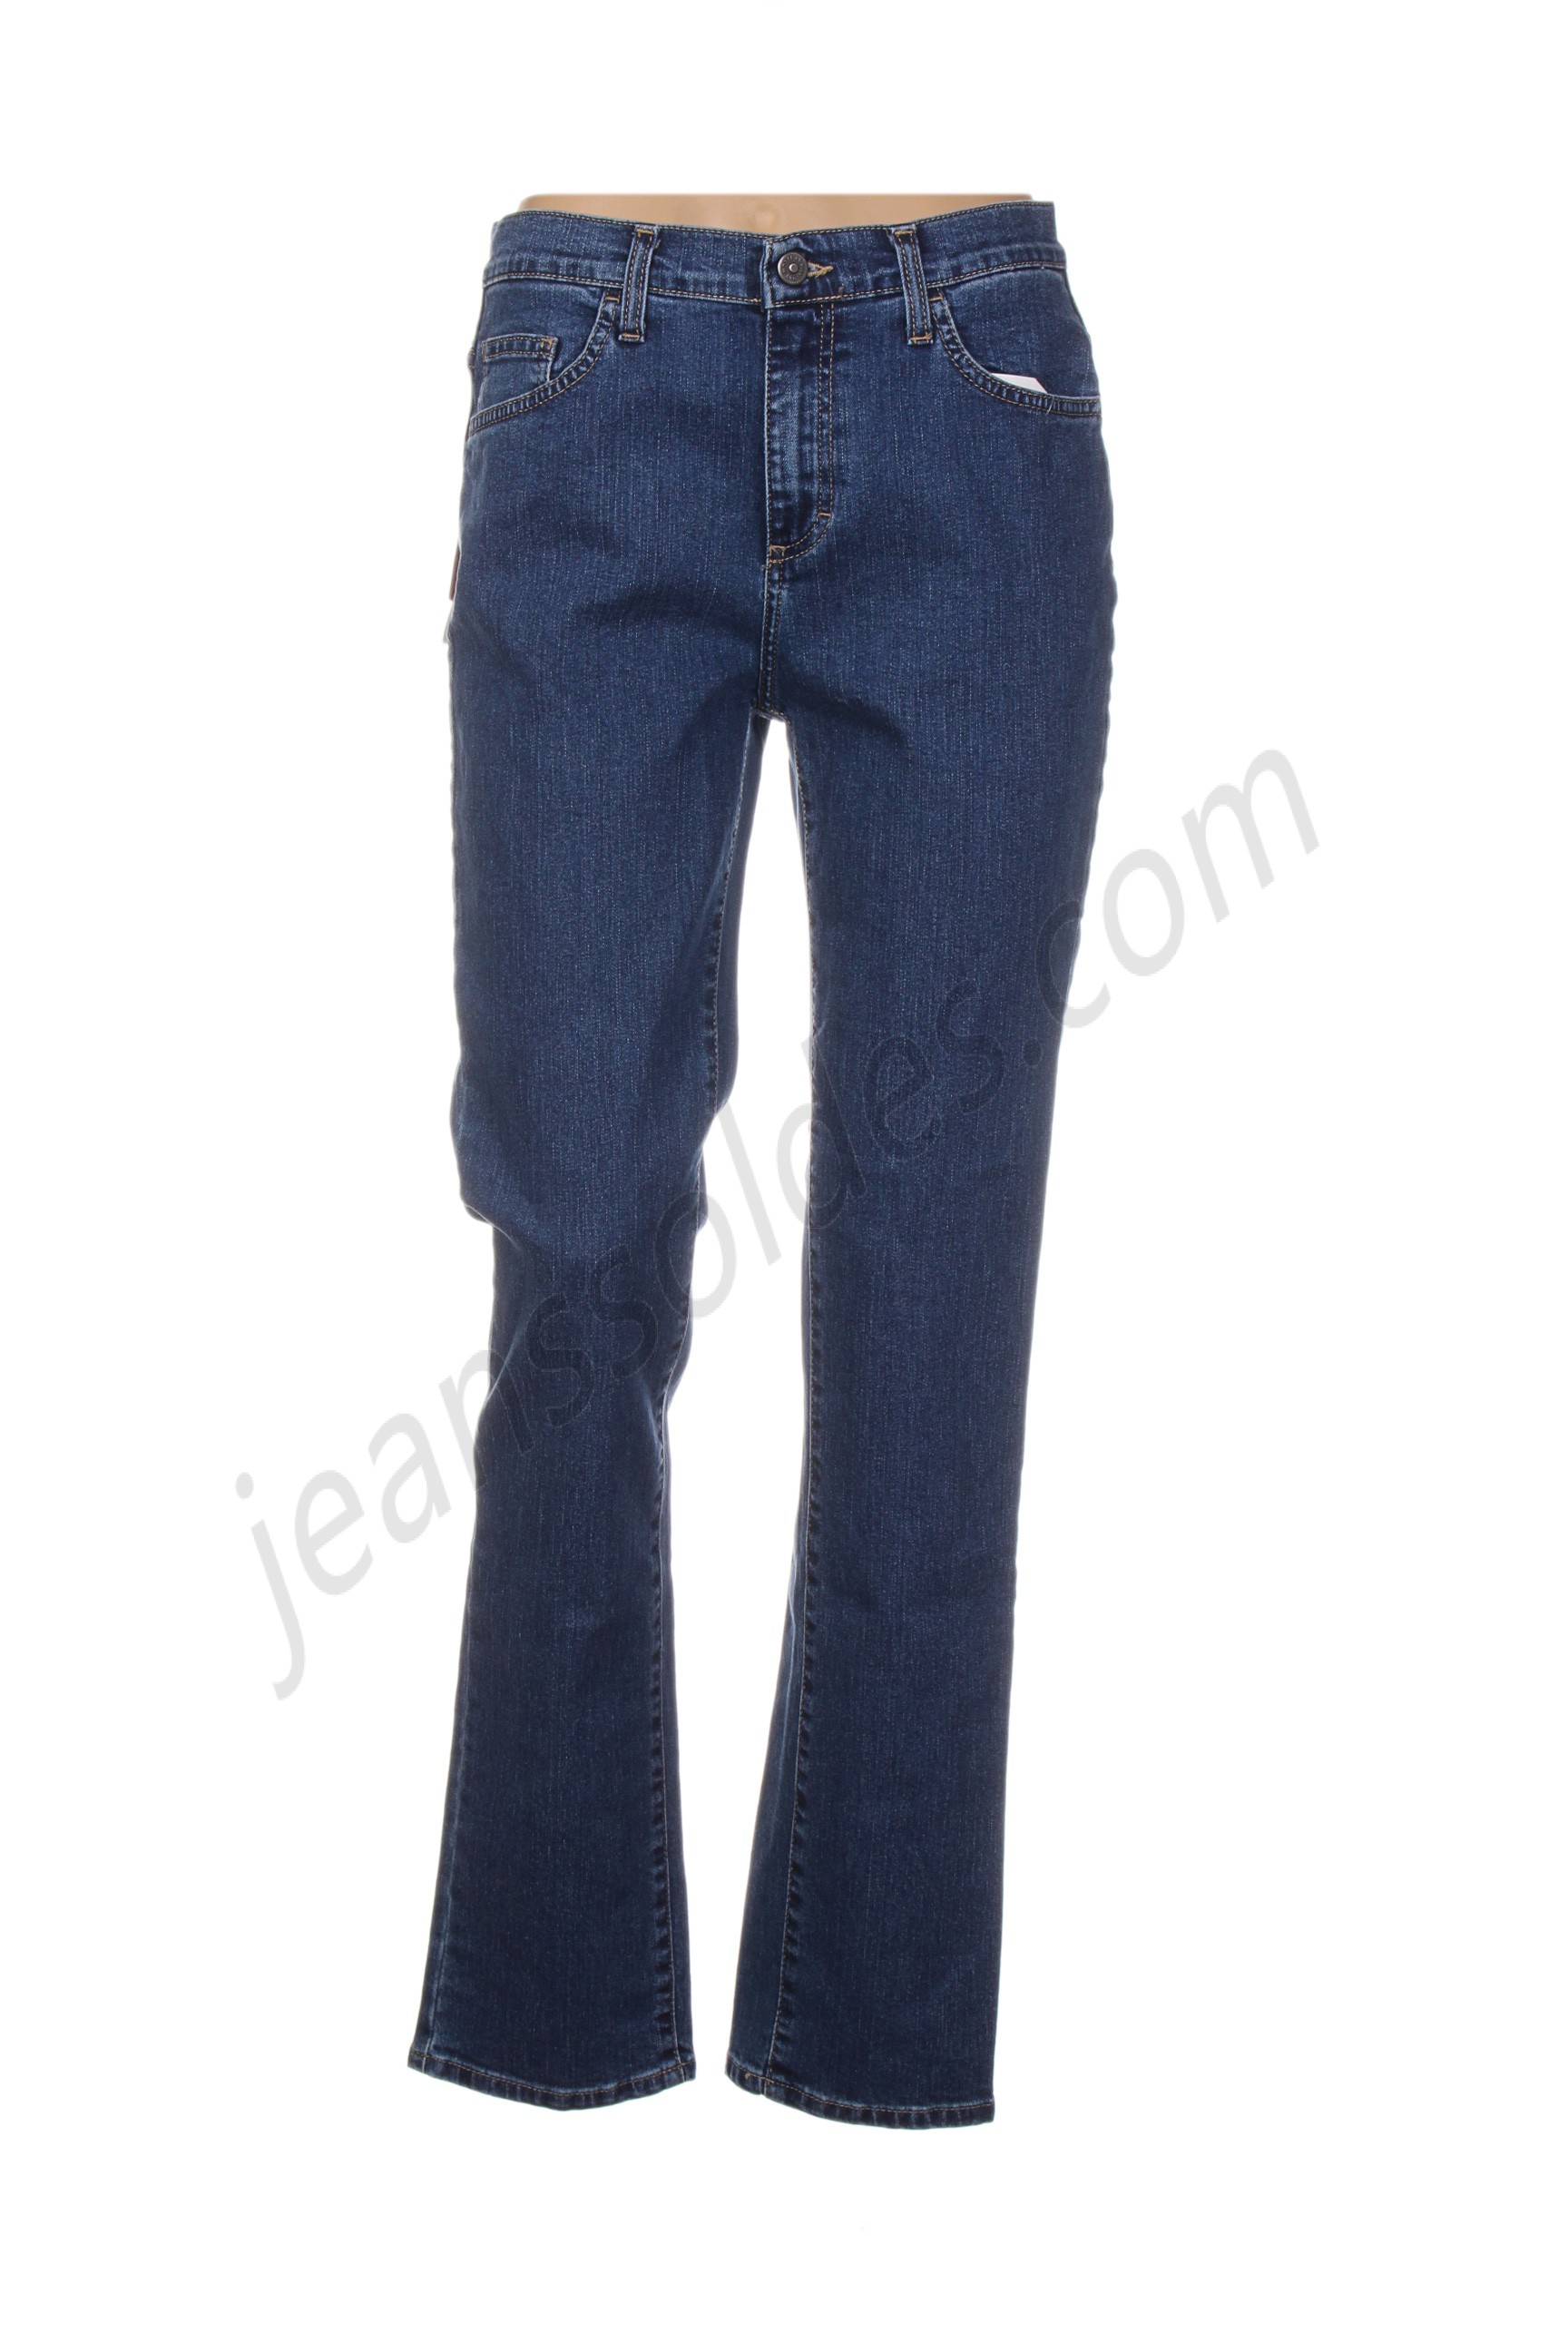 holiday-Jeans coupe slim prix d’amis - holiday-Jeans coupe slim prix d’amis